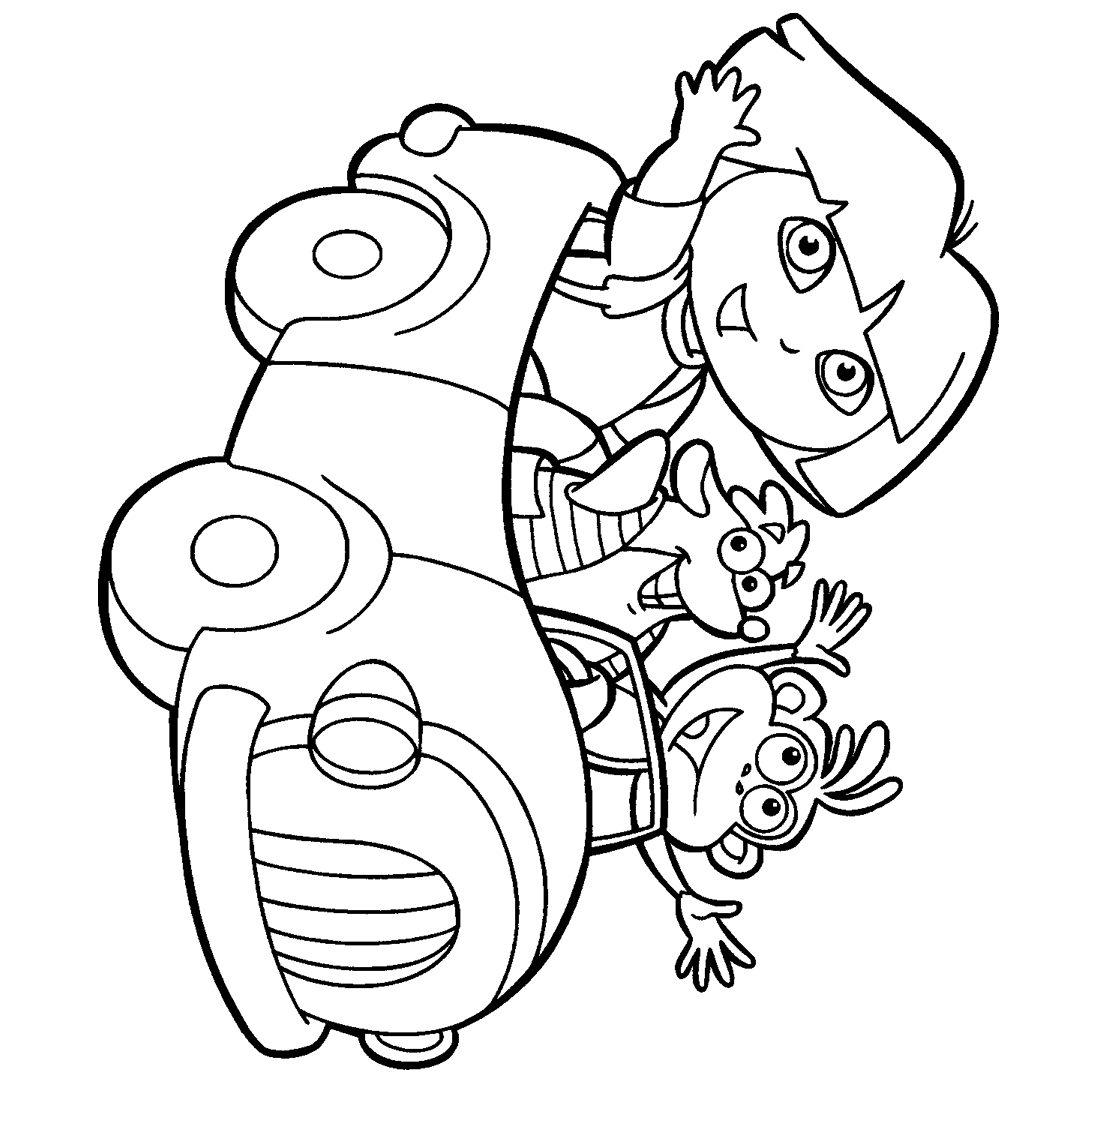 Printable Coloring Pages For Kids Coloring Pages For Kids Coloring Wallpapers Download Free Images Wallpaper [coloring654.blogspot.com]